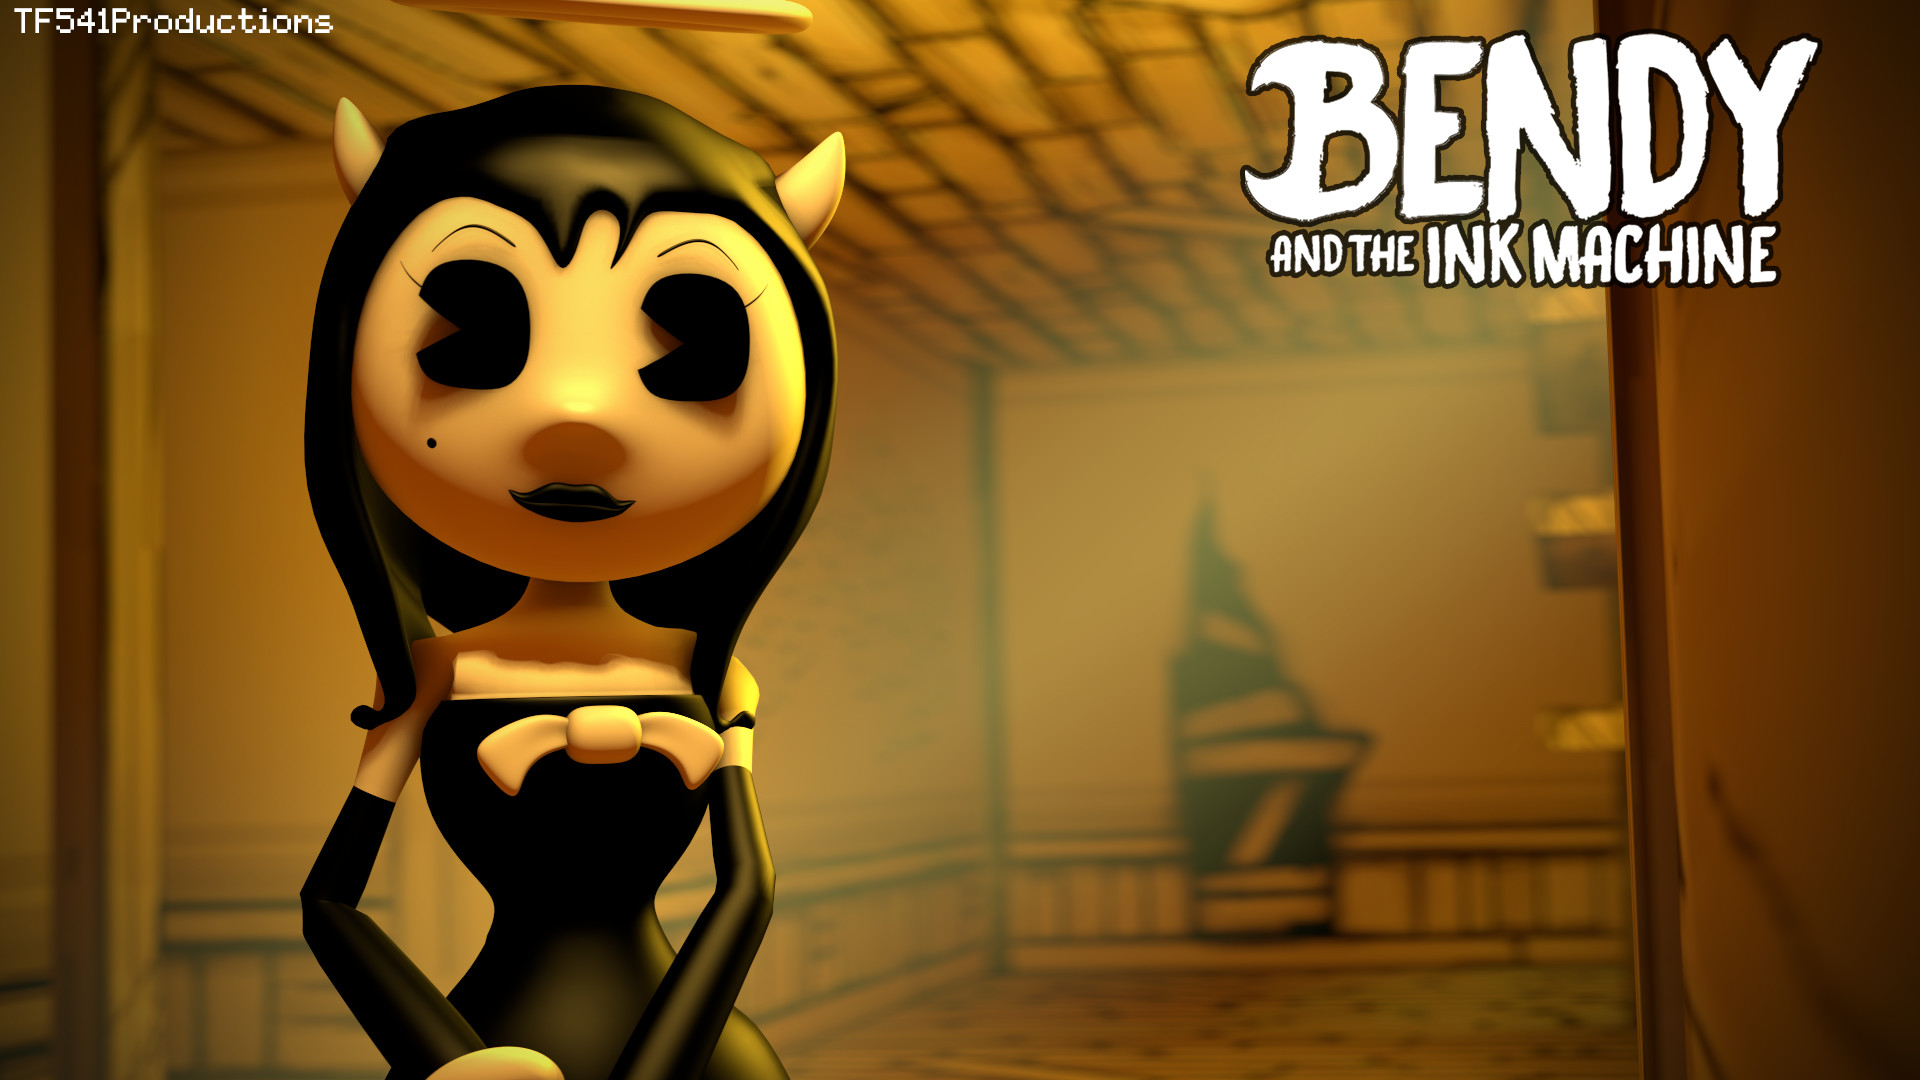 bendy and the ink machine alice angel background